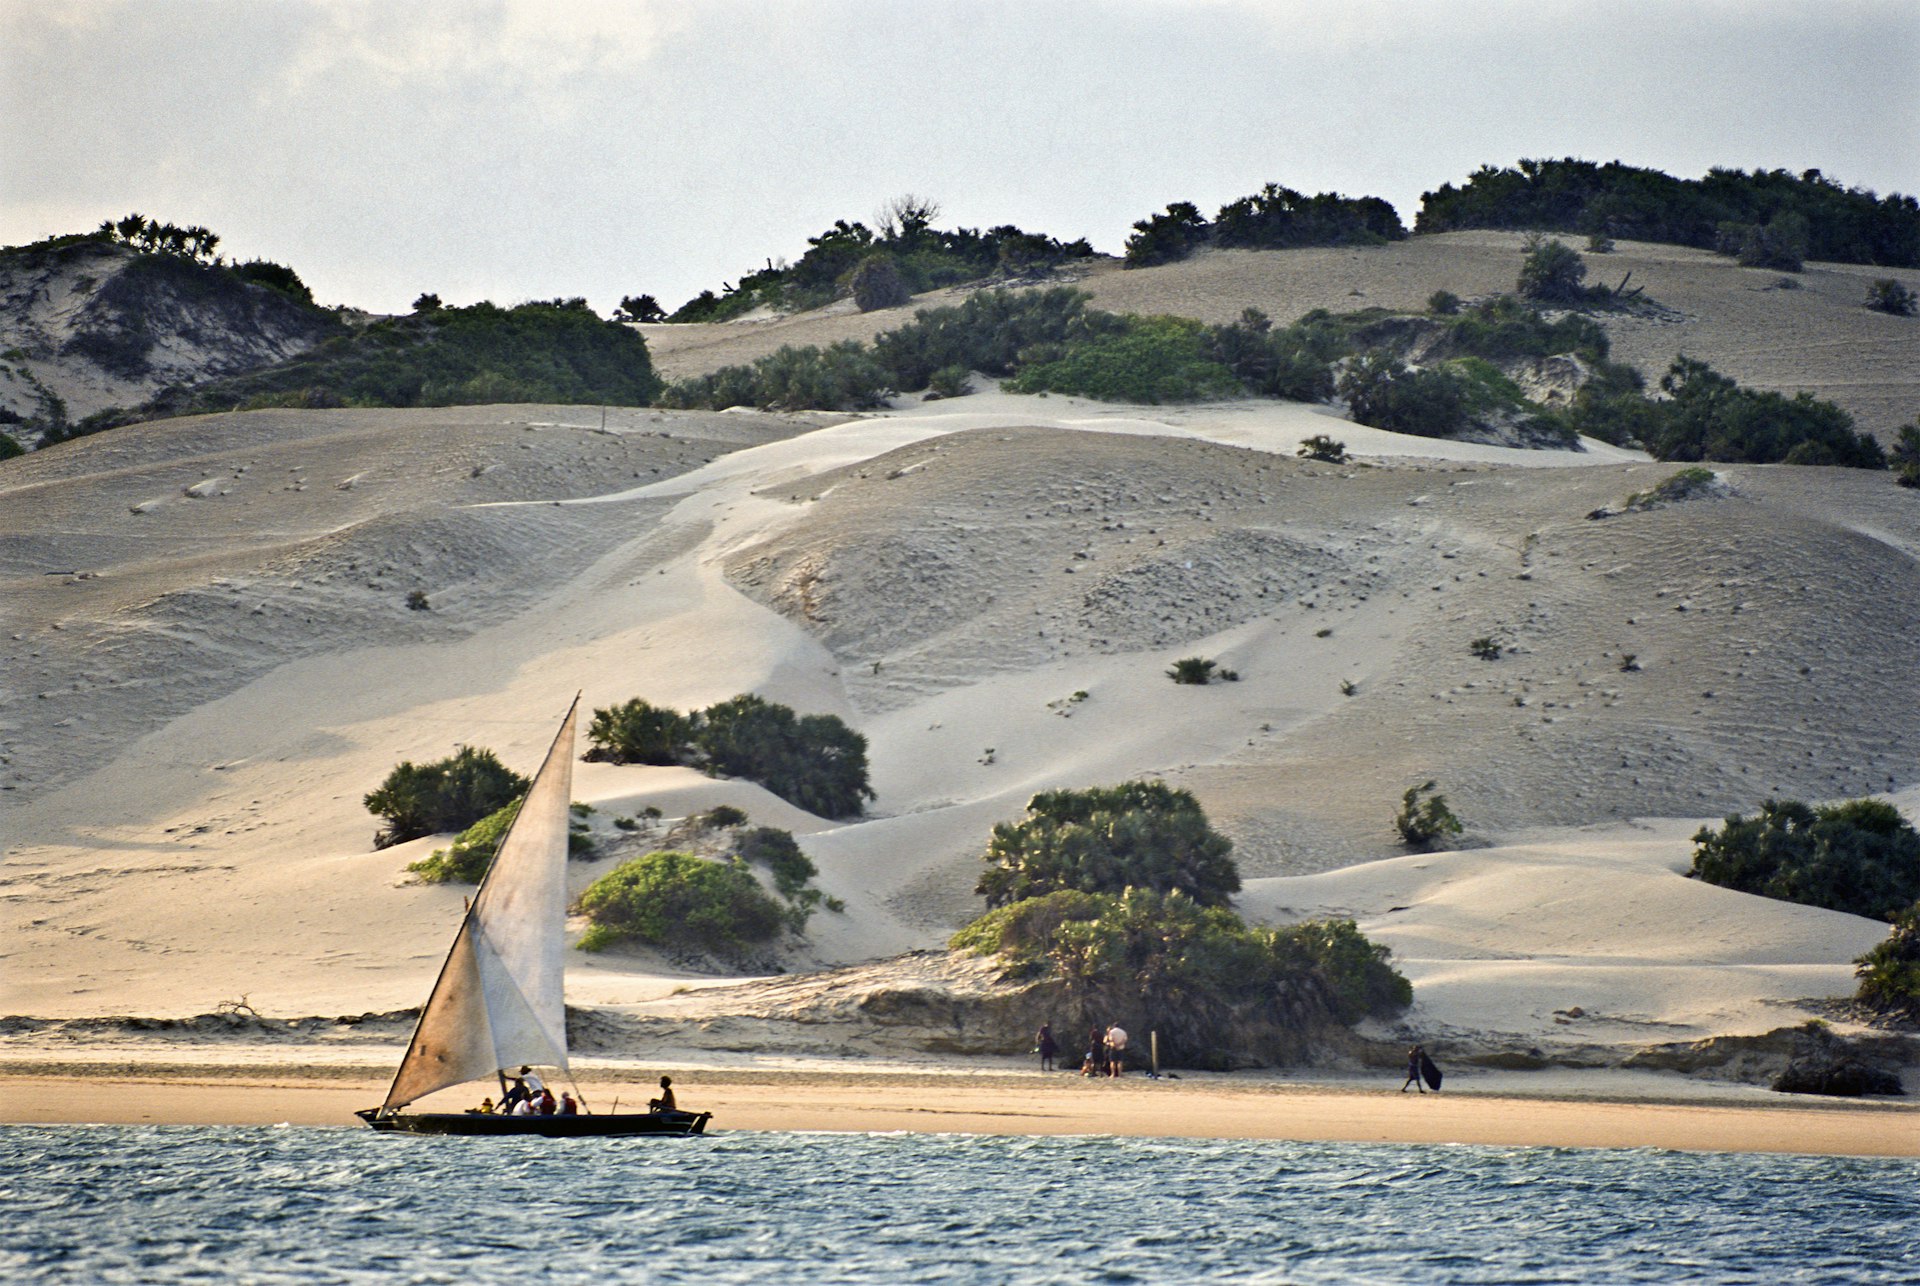 A traditional sailing vessel passes a beach